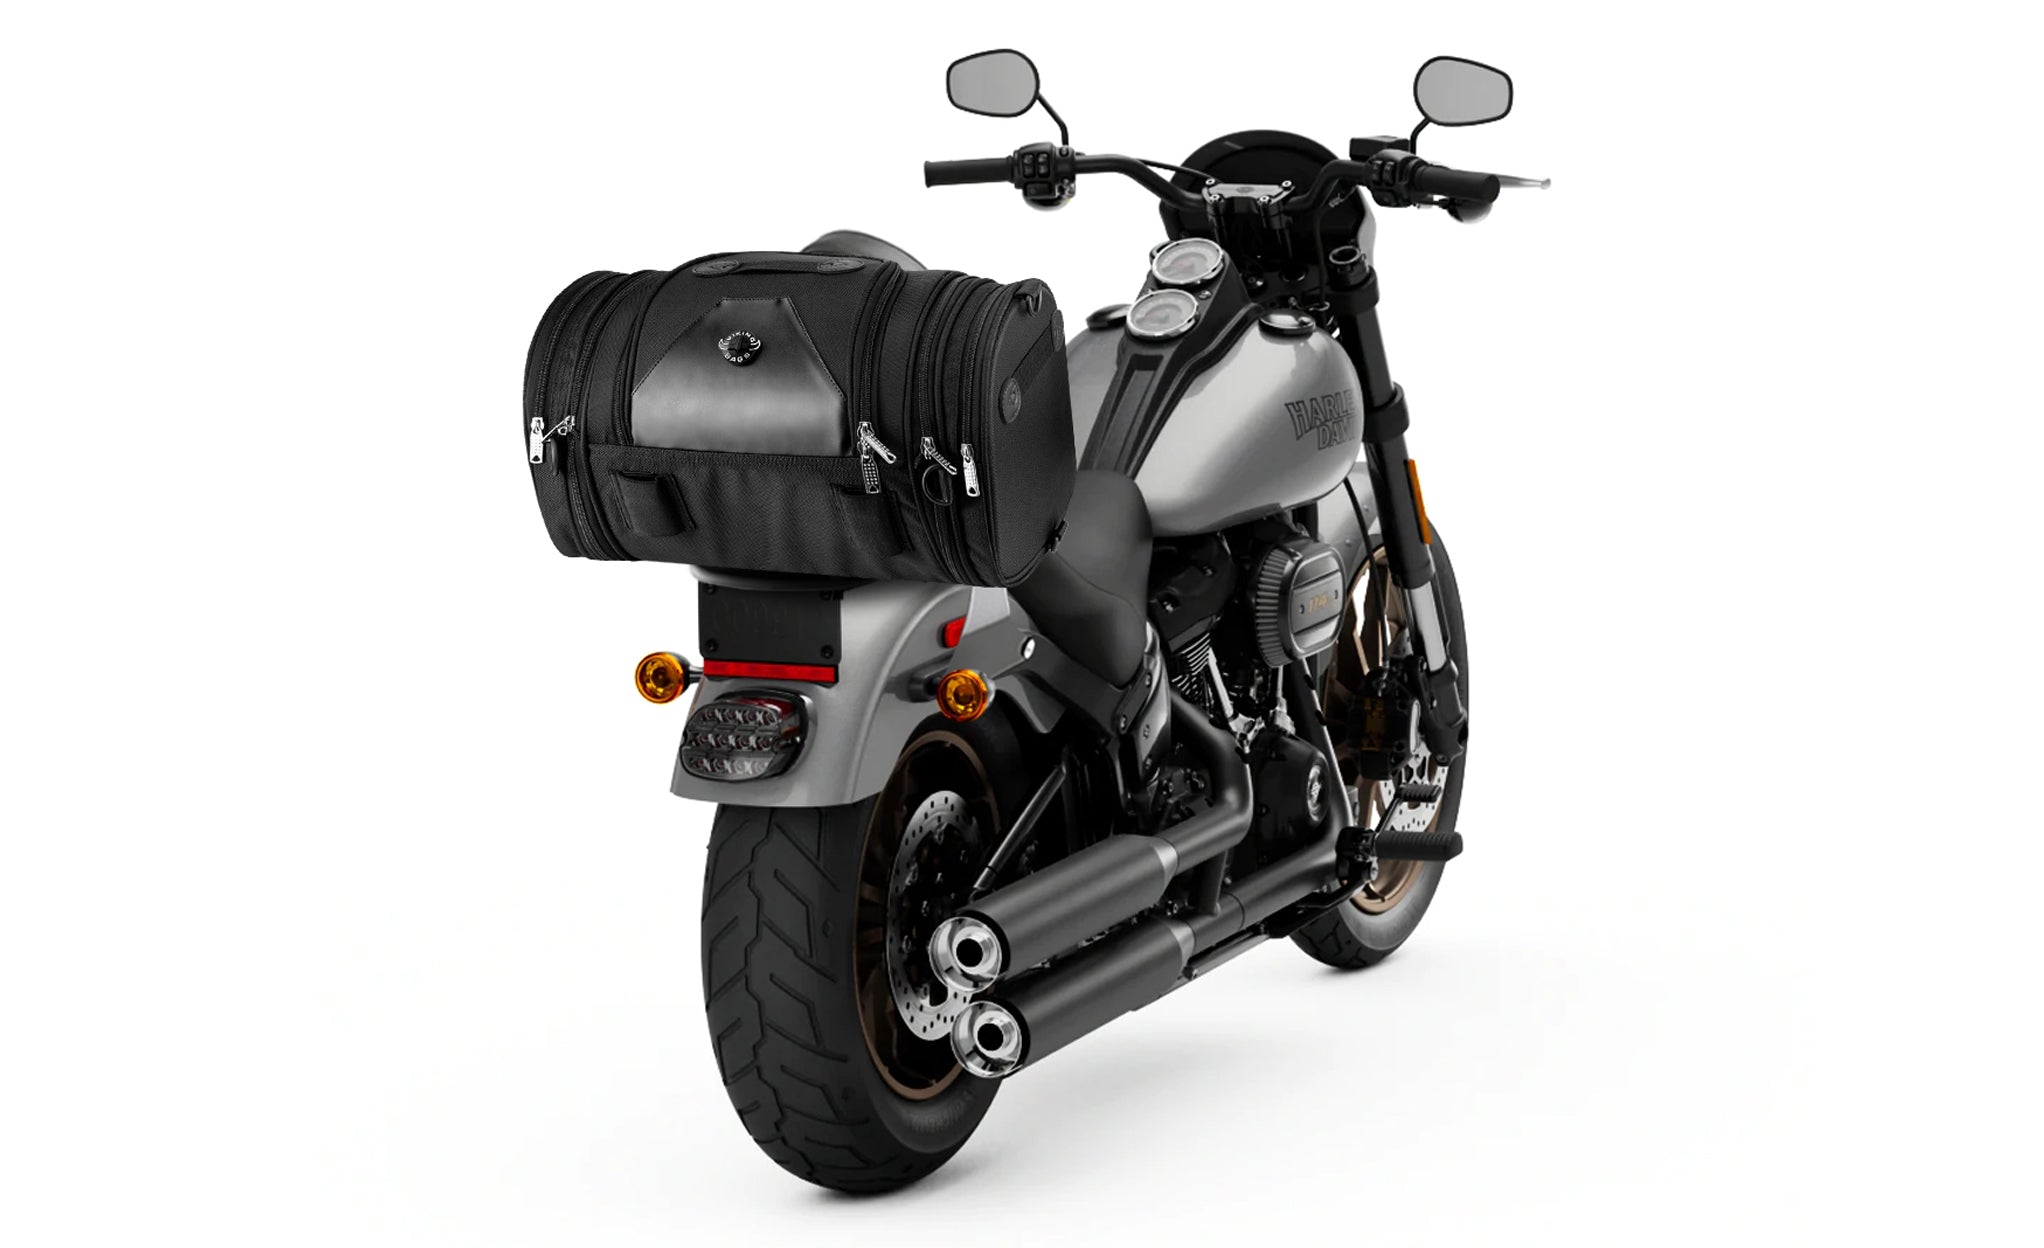 Viking Axwell Small Indian Motorcycle Roll Bag Bag on Bike View @expand